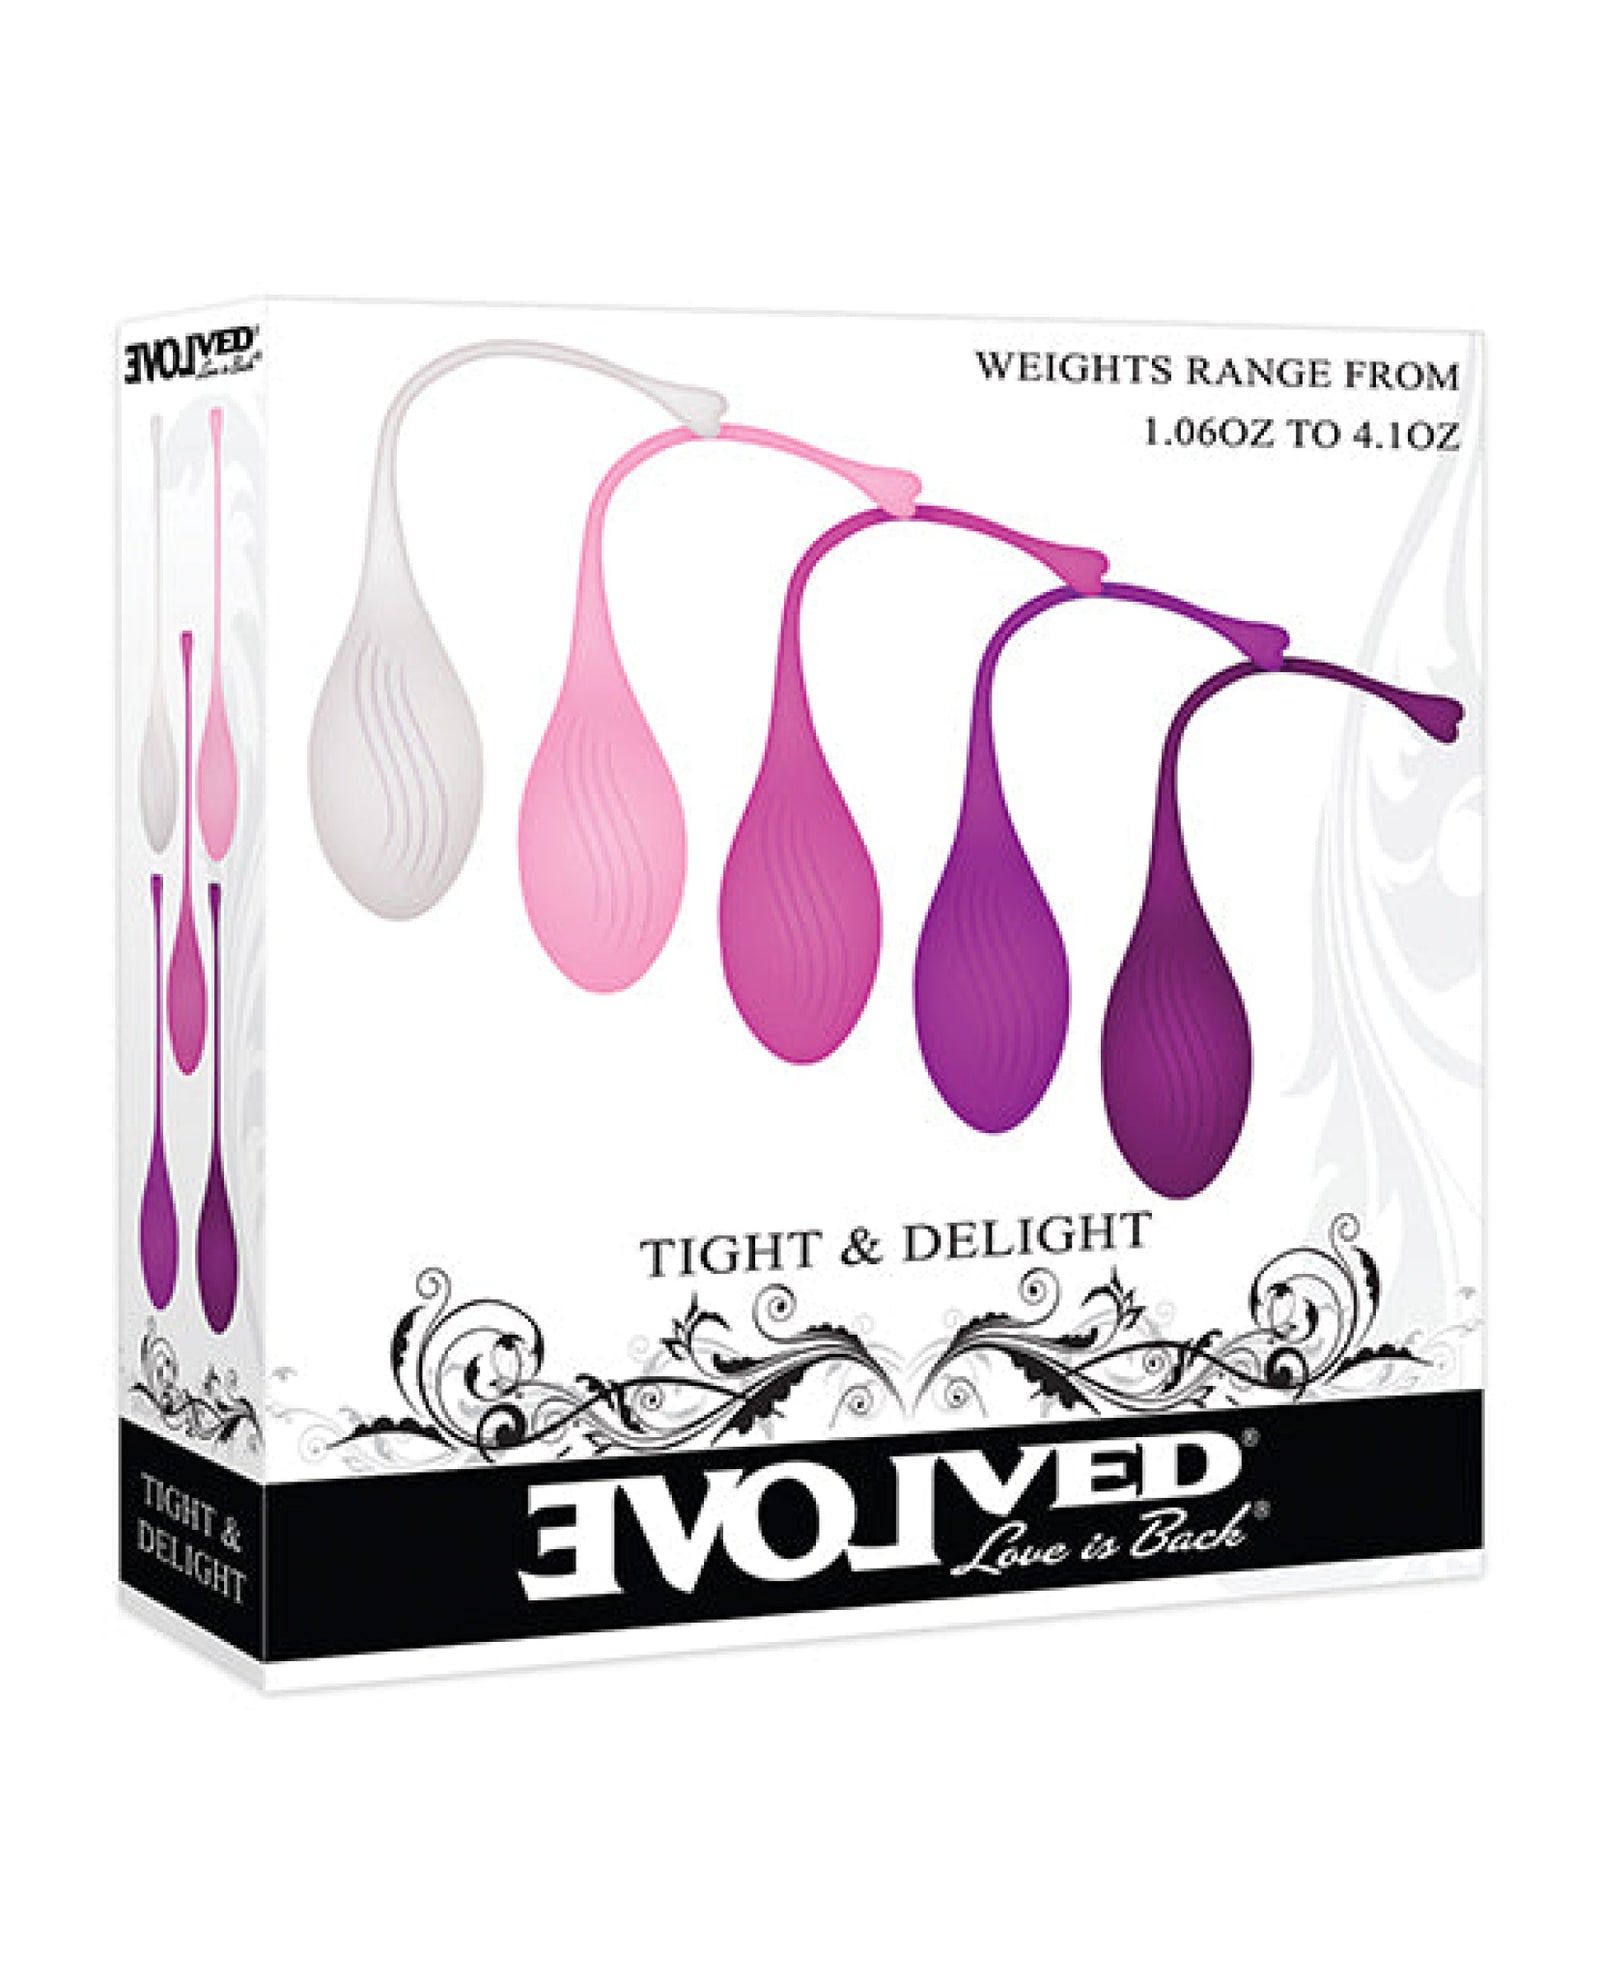 Evolved Tight & Delight 5 Pc Weighted Kegel Ball Set - Assorted Colors Evolved Novelties